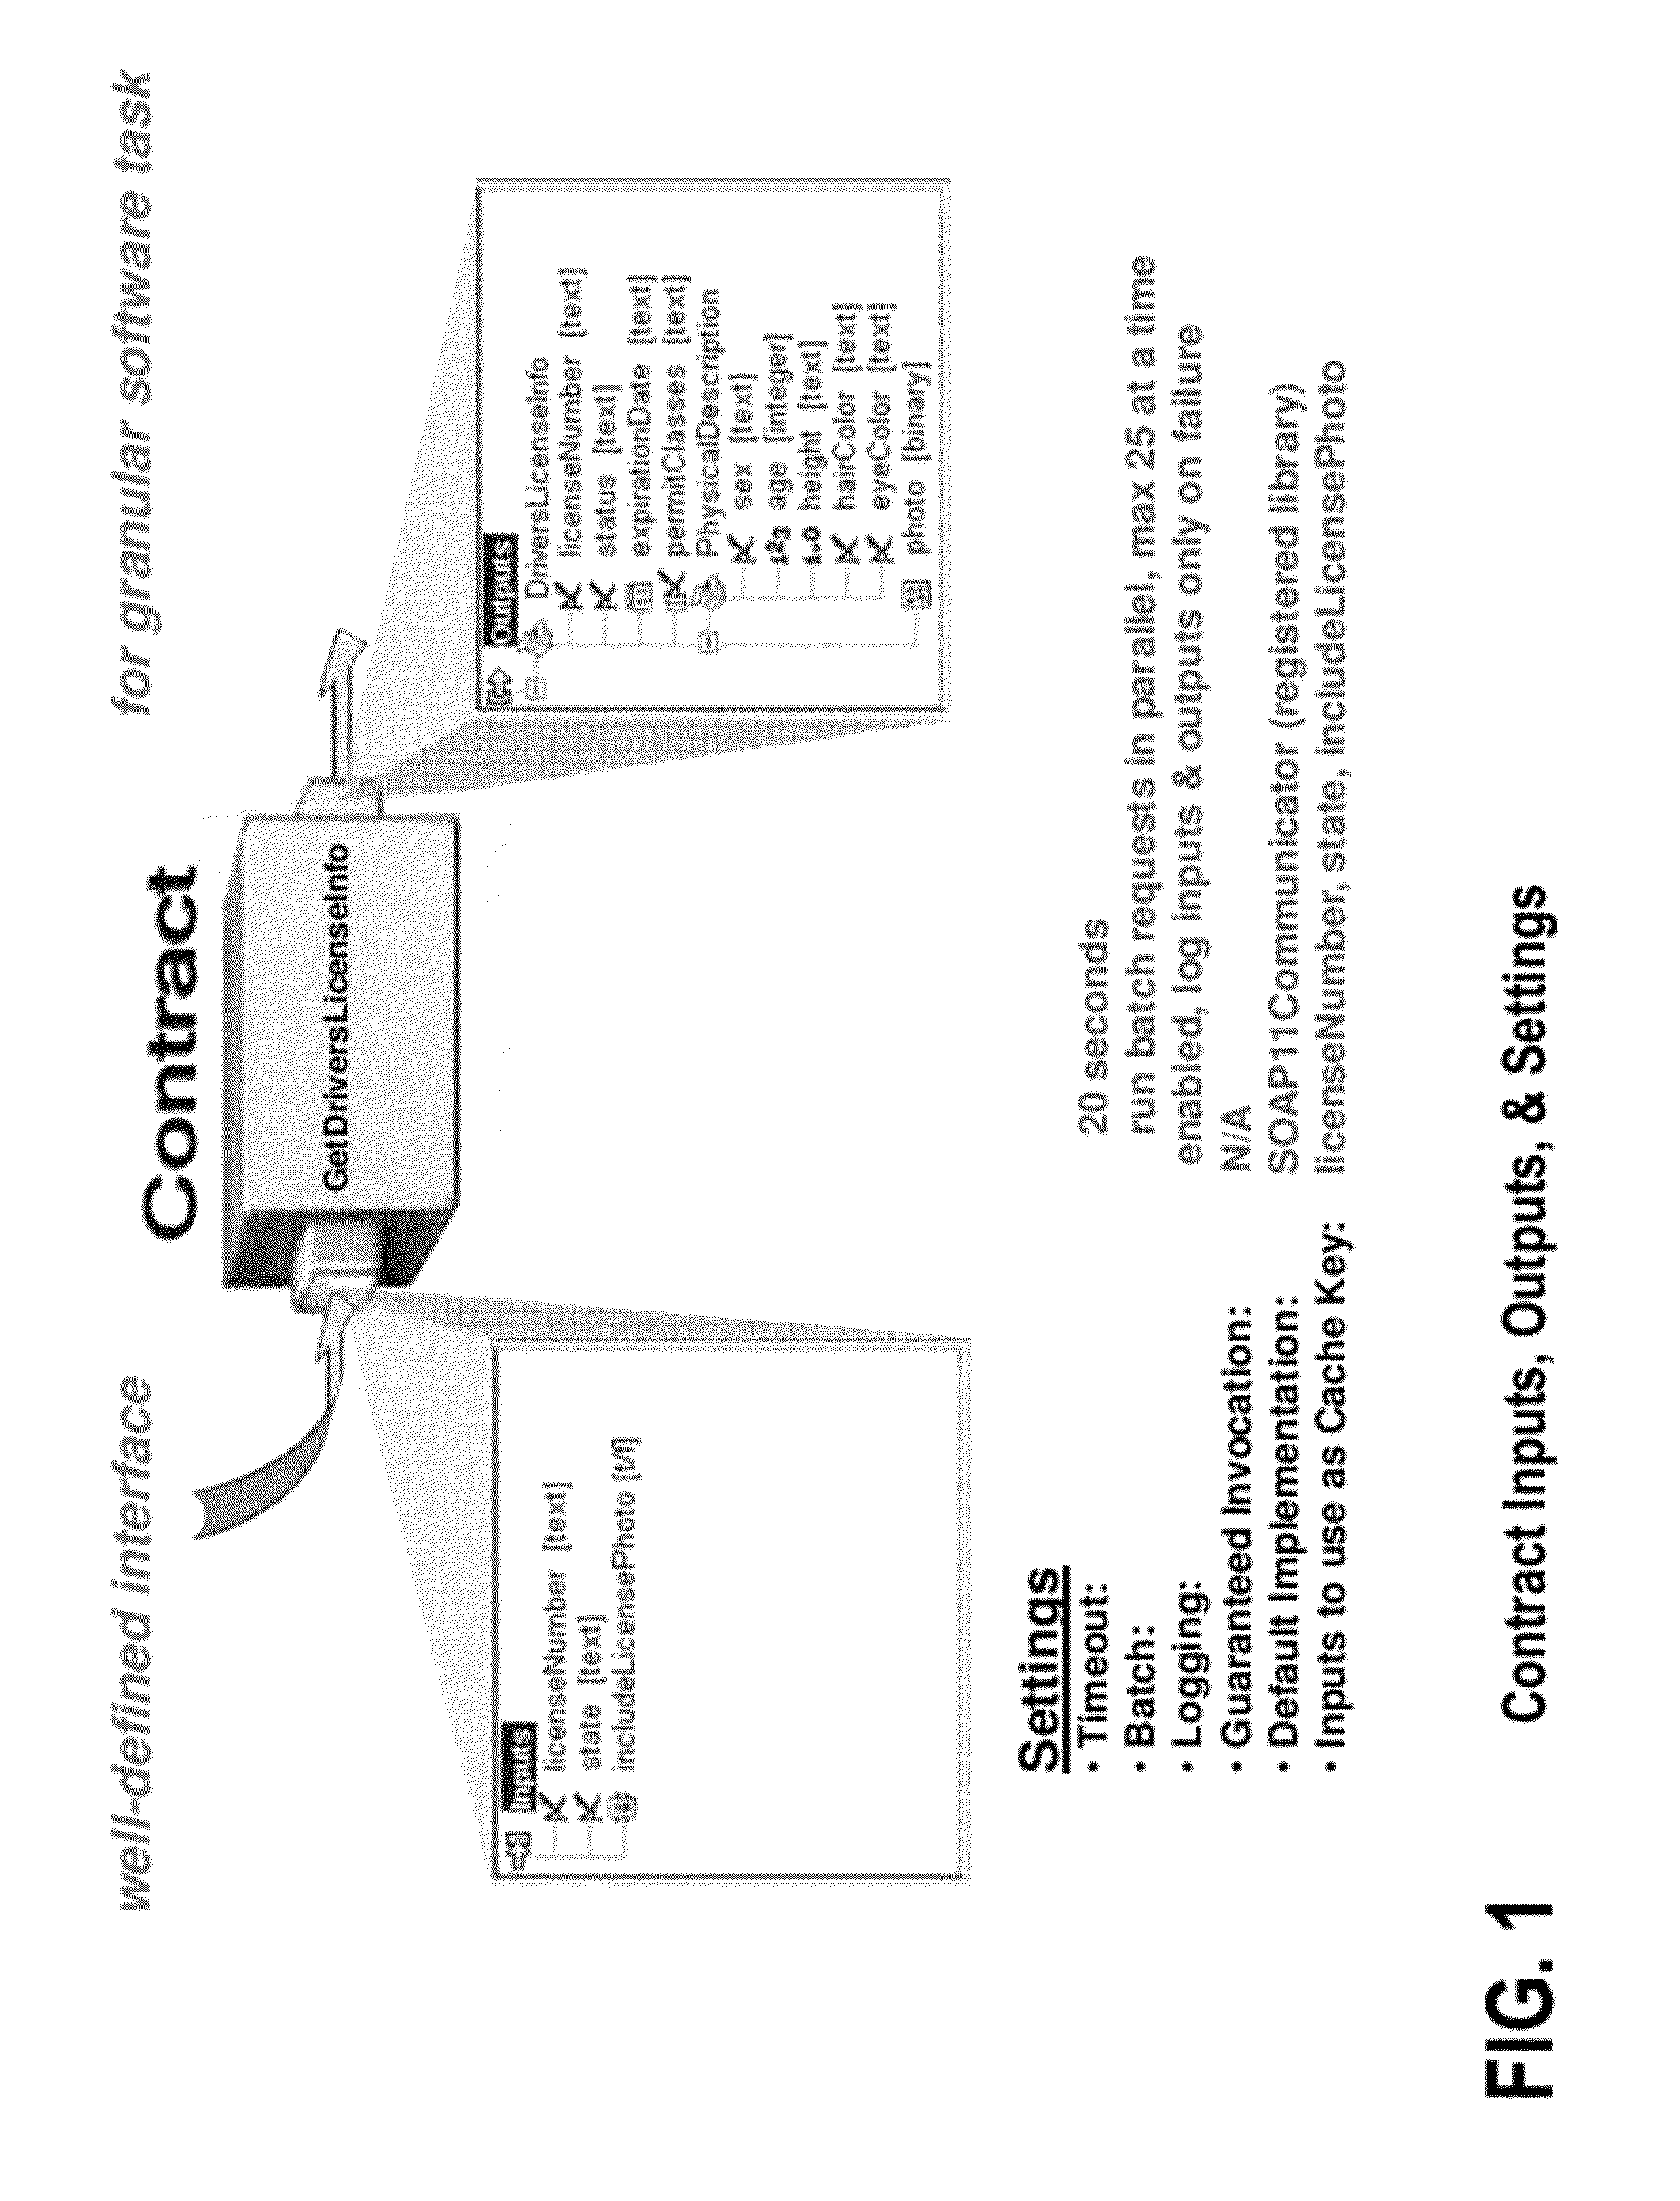 Semantic-based, service-oriented system and method of developing, programming and managing software modules and software solutions